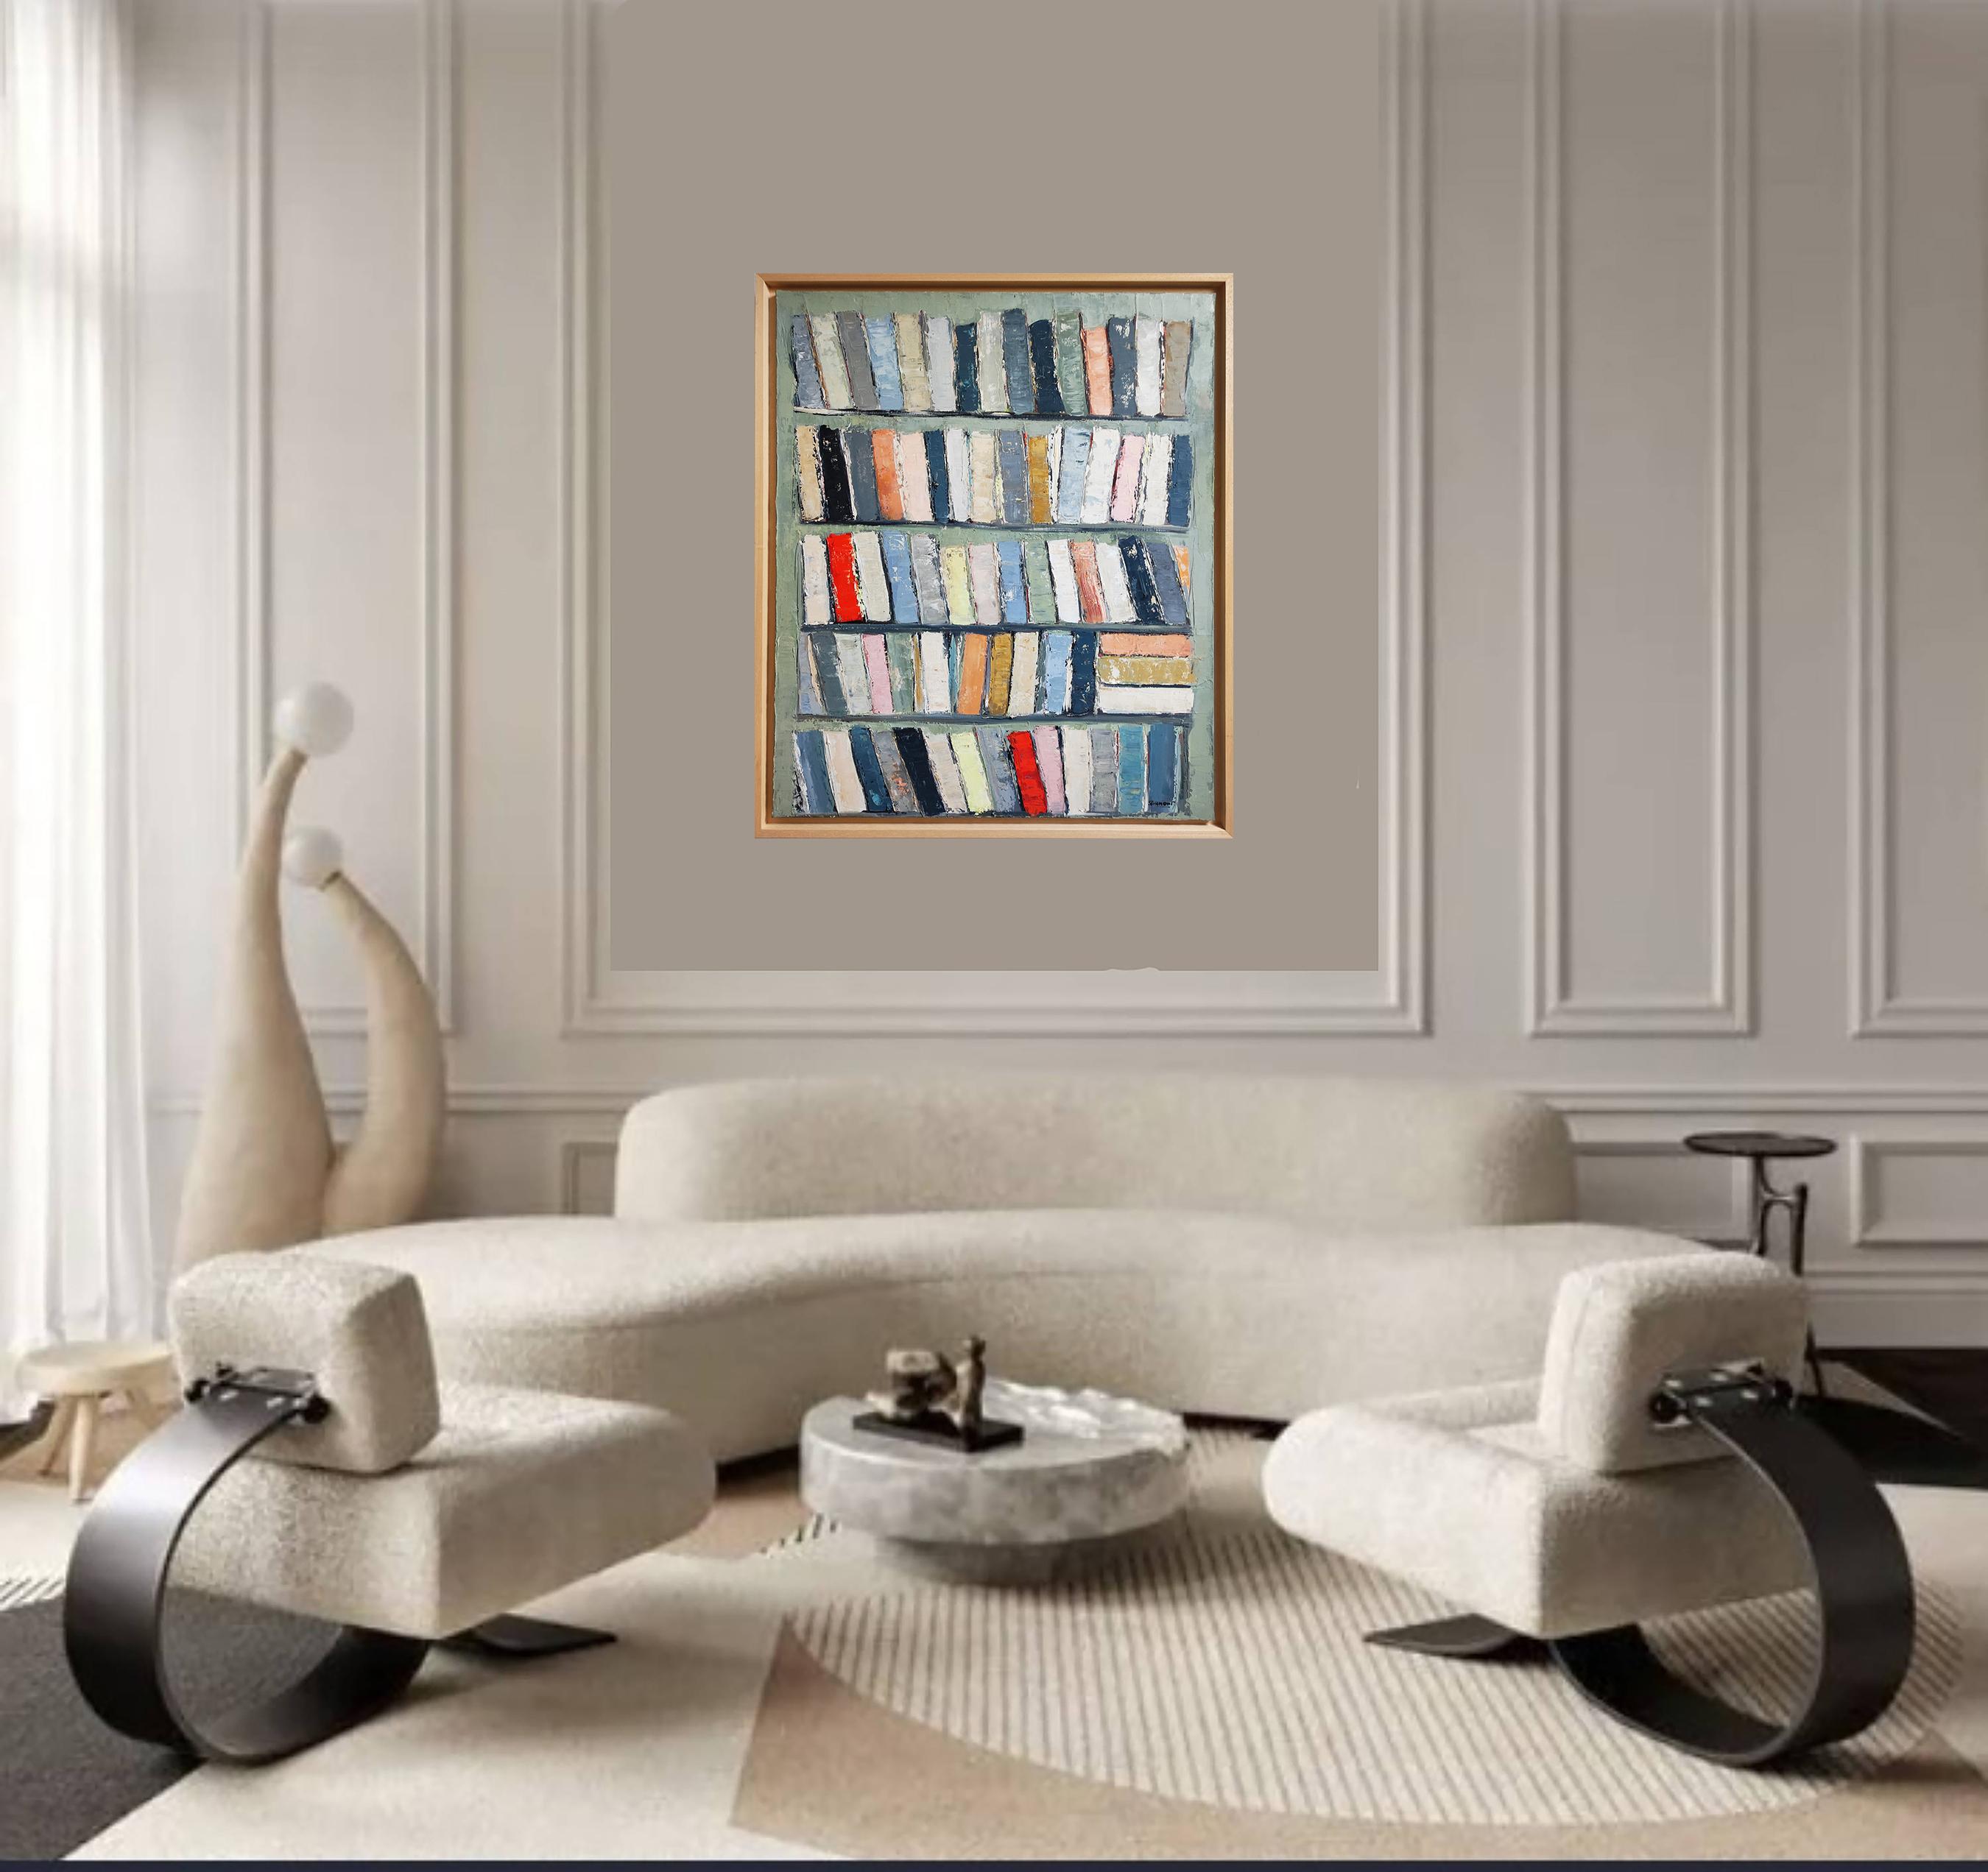 Archives, colors books in library, abstract, expressionism, oil on canvas, green - Abstract Geometric Painting by SOPHIE DUMONT